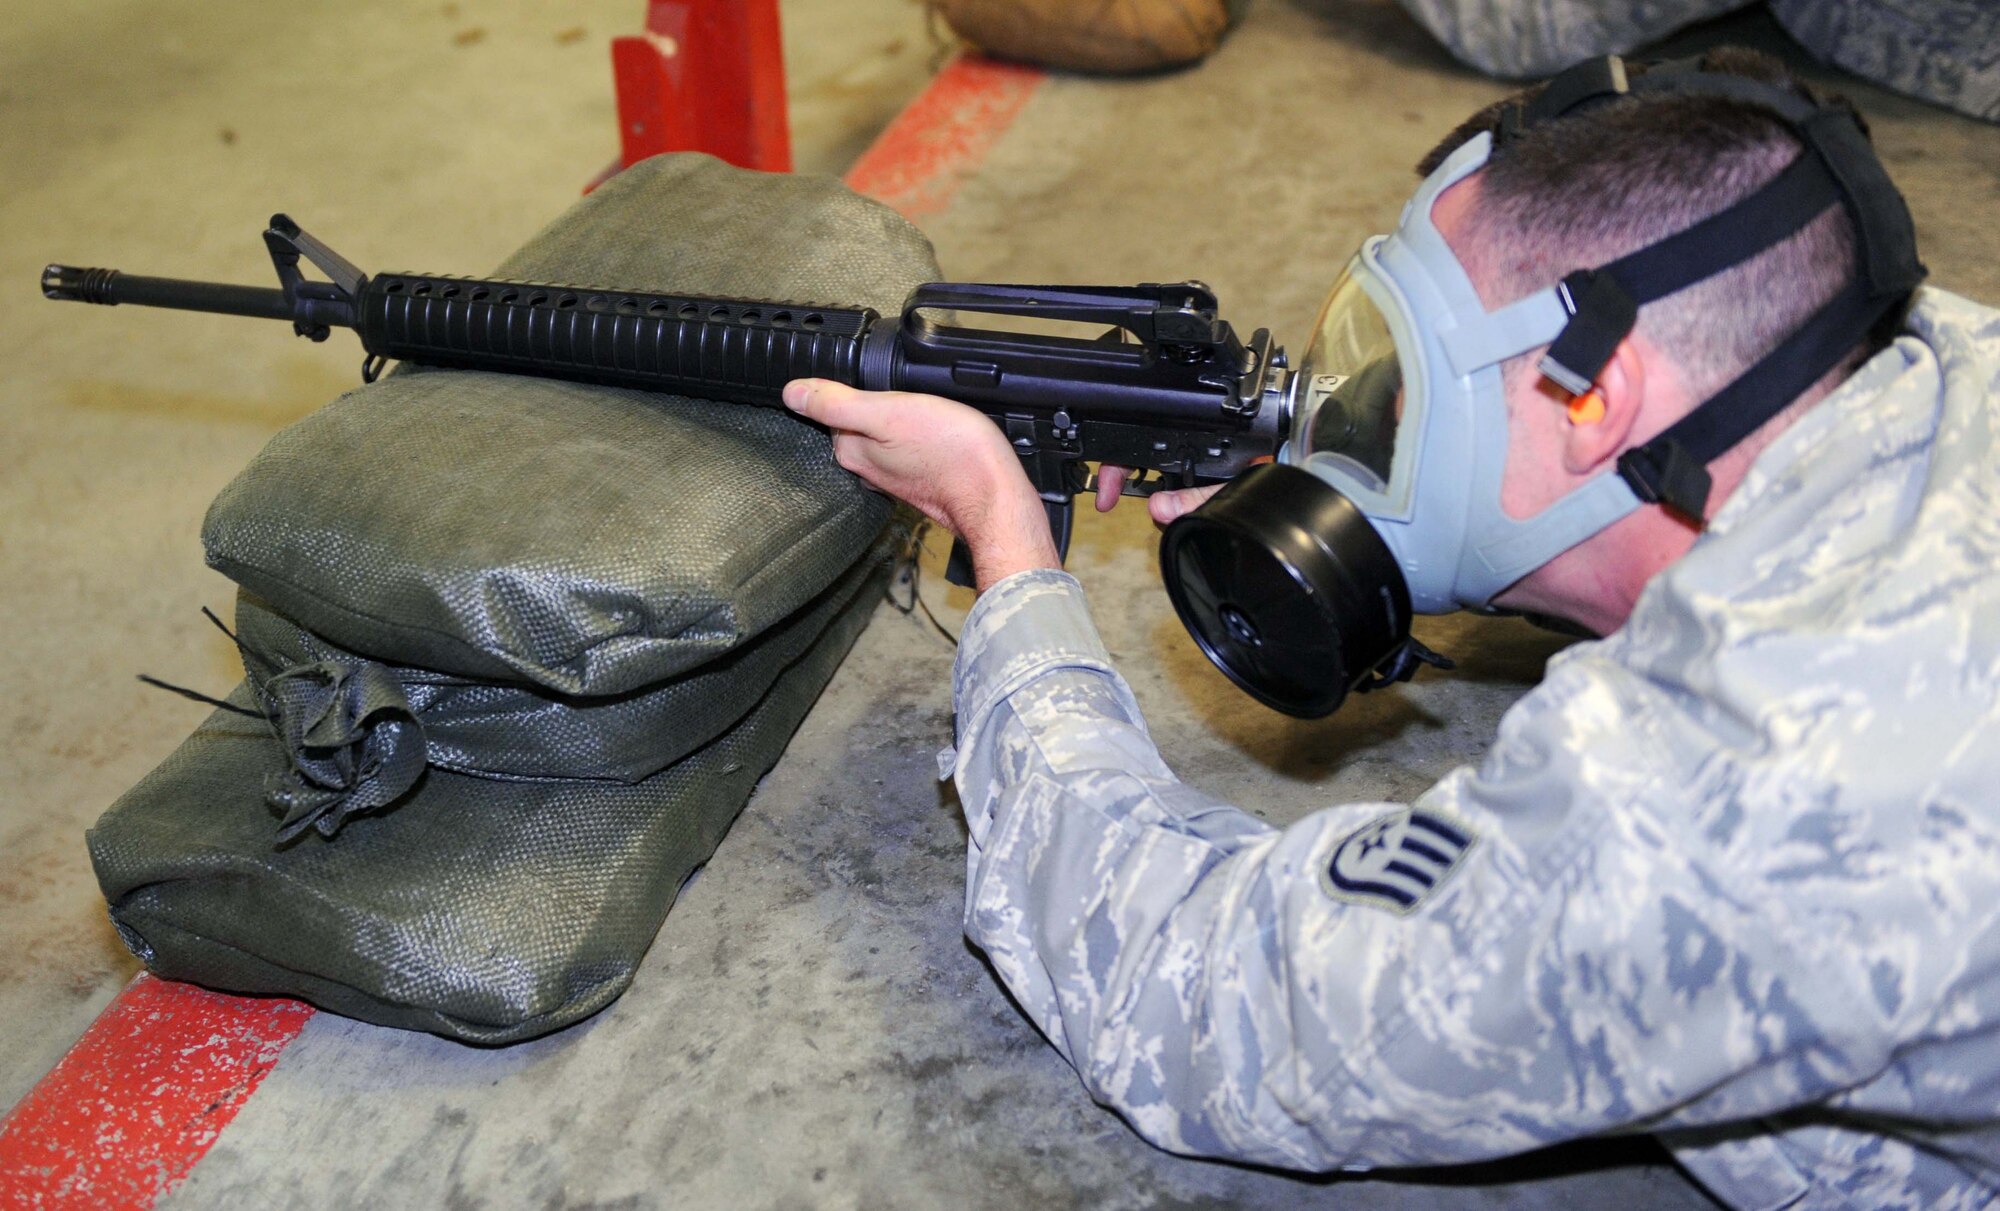 Staff Sgt. Christopher Payne, 4th Aircraft Maintenance Squadron armament technician, fires an M-16 carbine at the Combat Arms Training and Maintenance facility on Seymour Johnson Air Force Base, N.C., June 16, 2009. Firing with a gas mask is just one portion of M-16 qualification training. (U.S. Air Force photo by Airman 1st Class Gino Reyes)